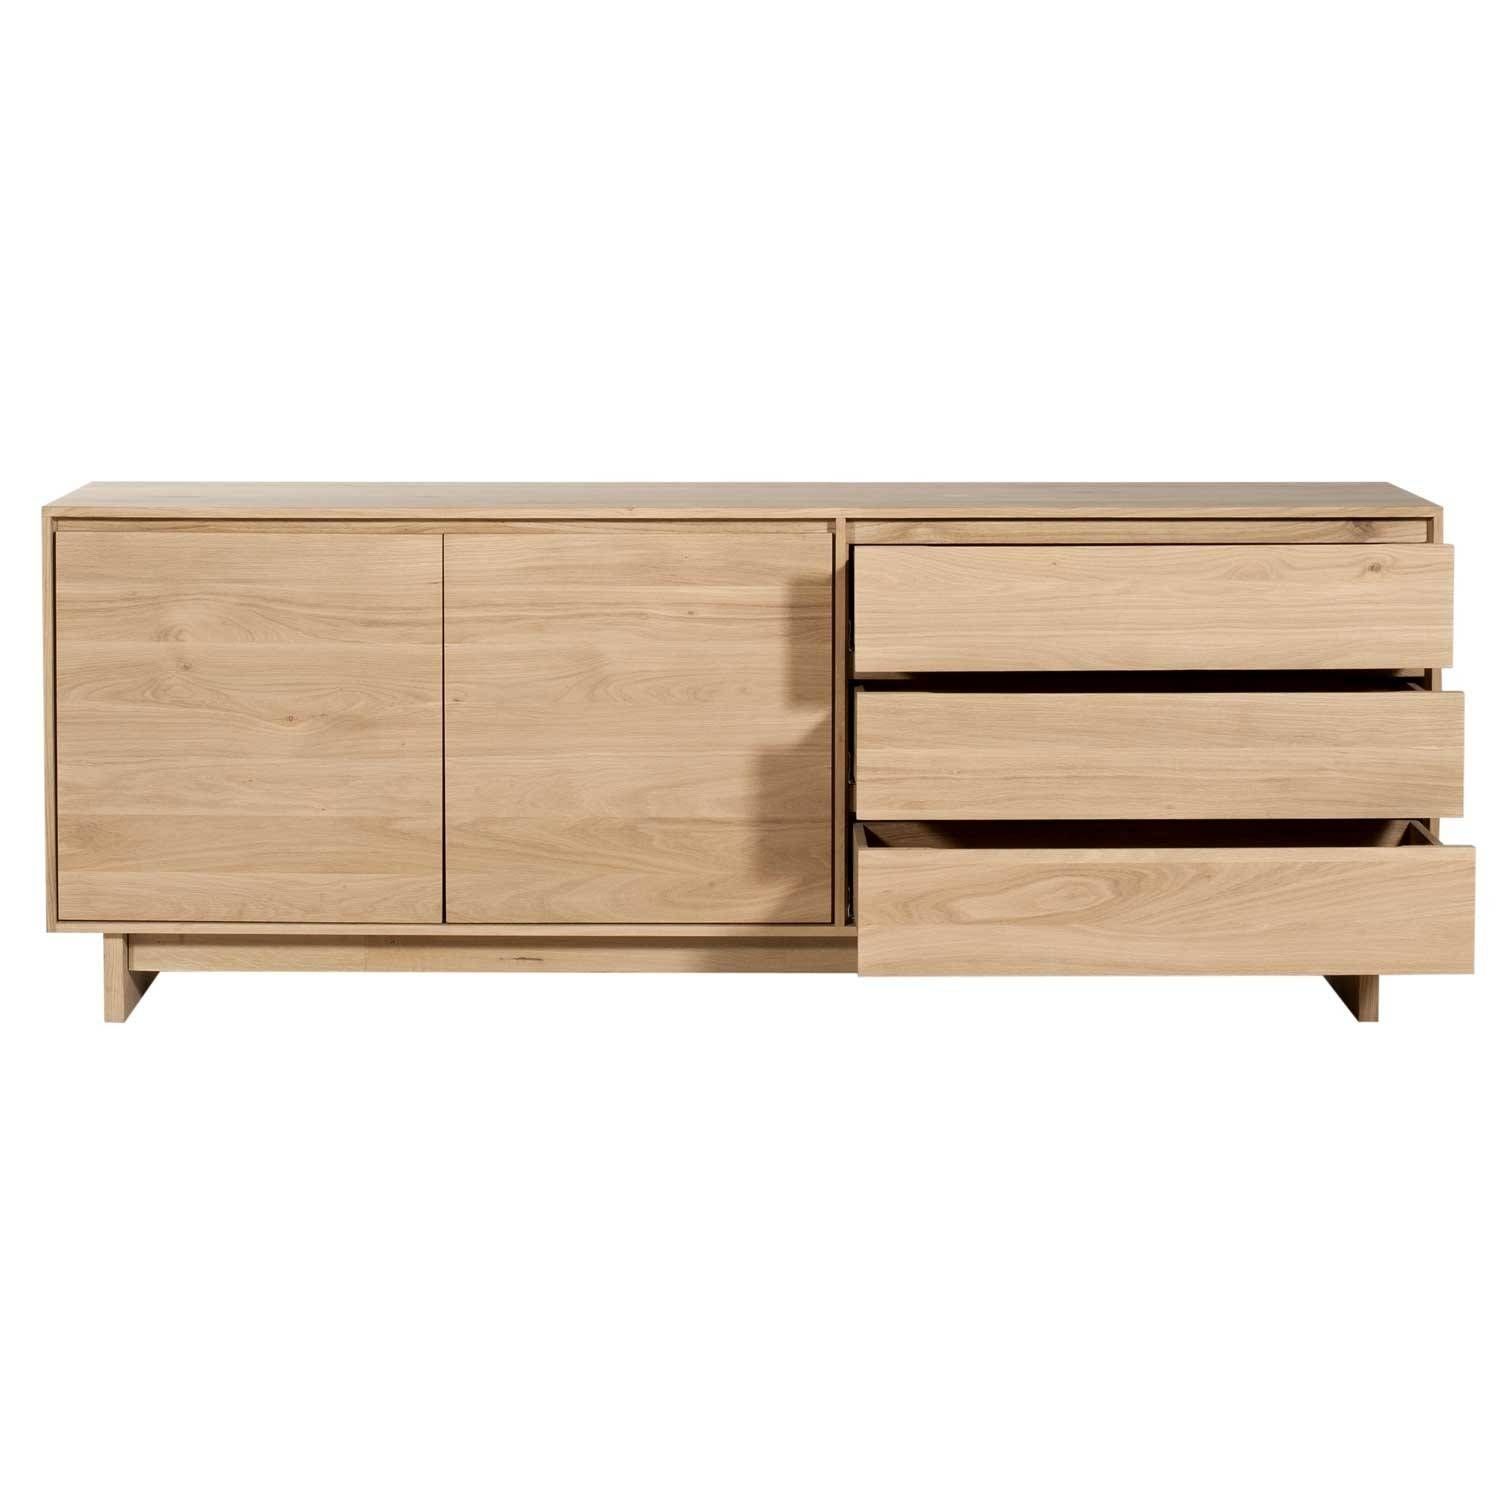 Ethnicraft Oak Wave Sideboard Throughout Low Wooden Sideboards (View 7 of 15)